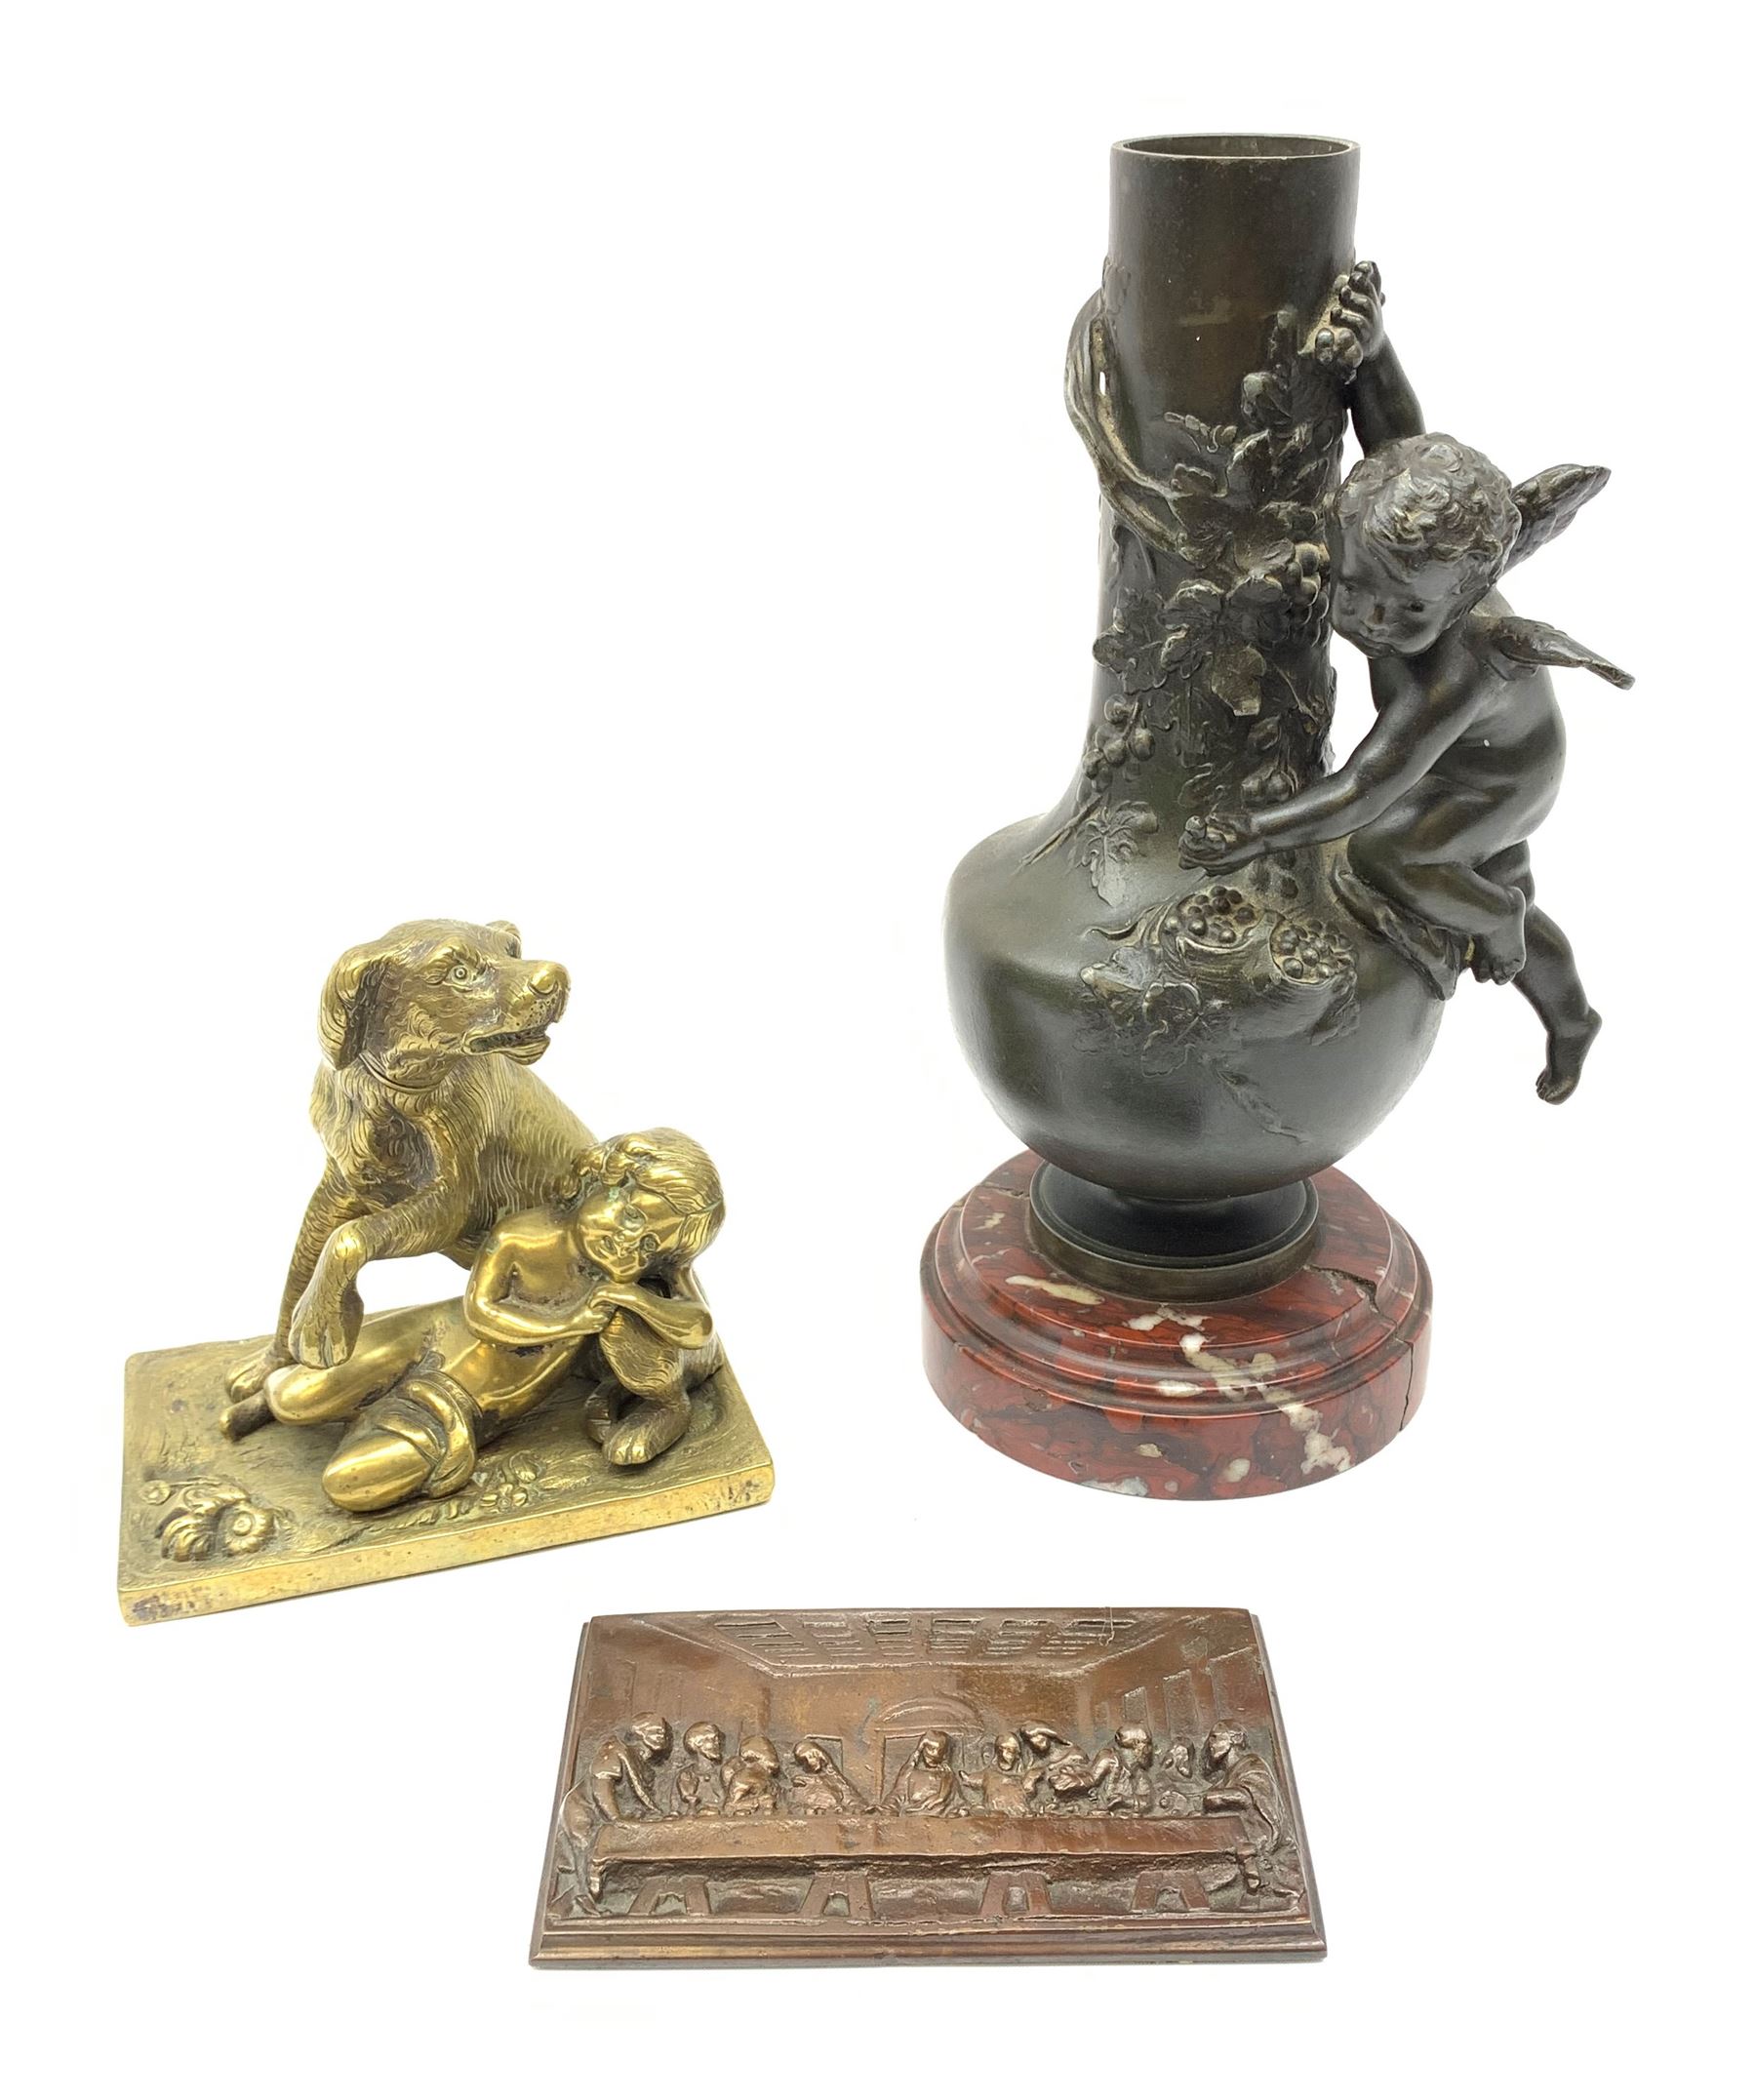 A bronzed spelter vase detailed with a fruiting vine and mounted with a cherub